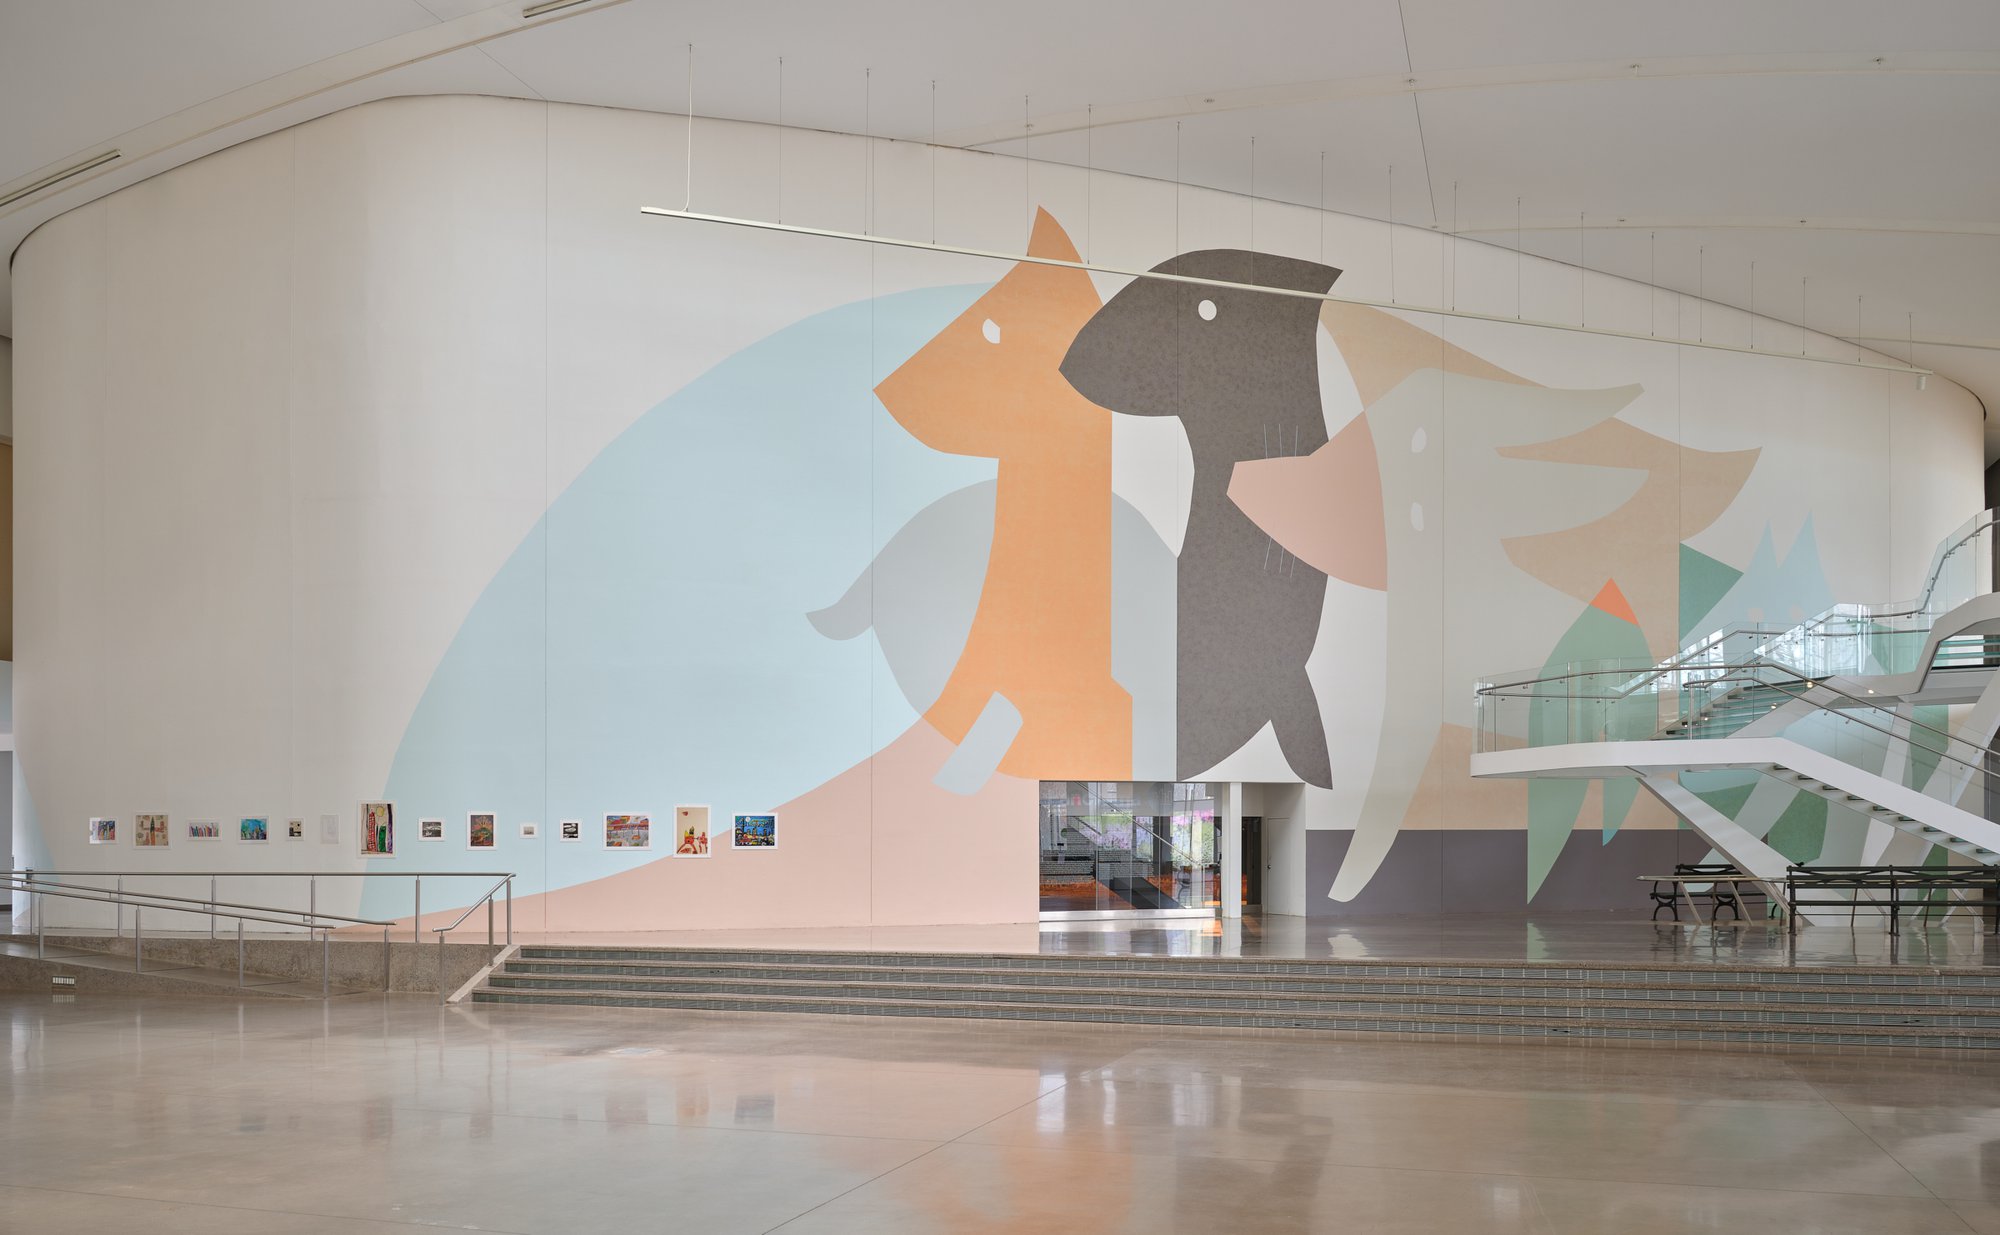 Ulrike Müller, The Conference of Animals (Α Μural), 2020. Installation view, The Conference of Animals, Queens Museum, New York, 2020